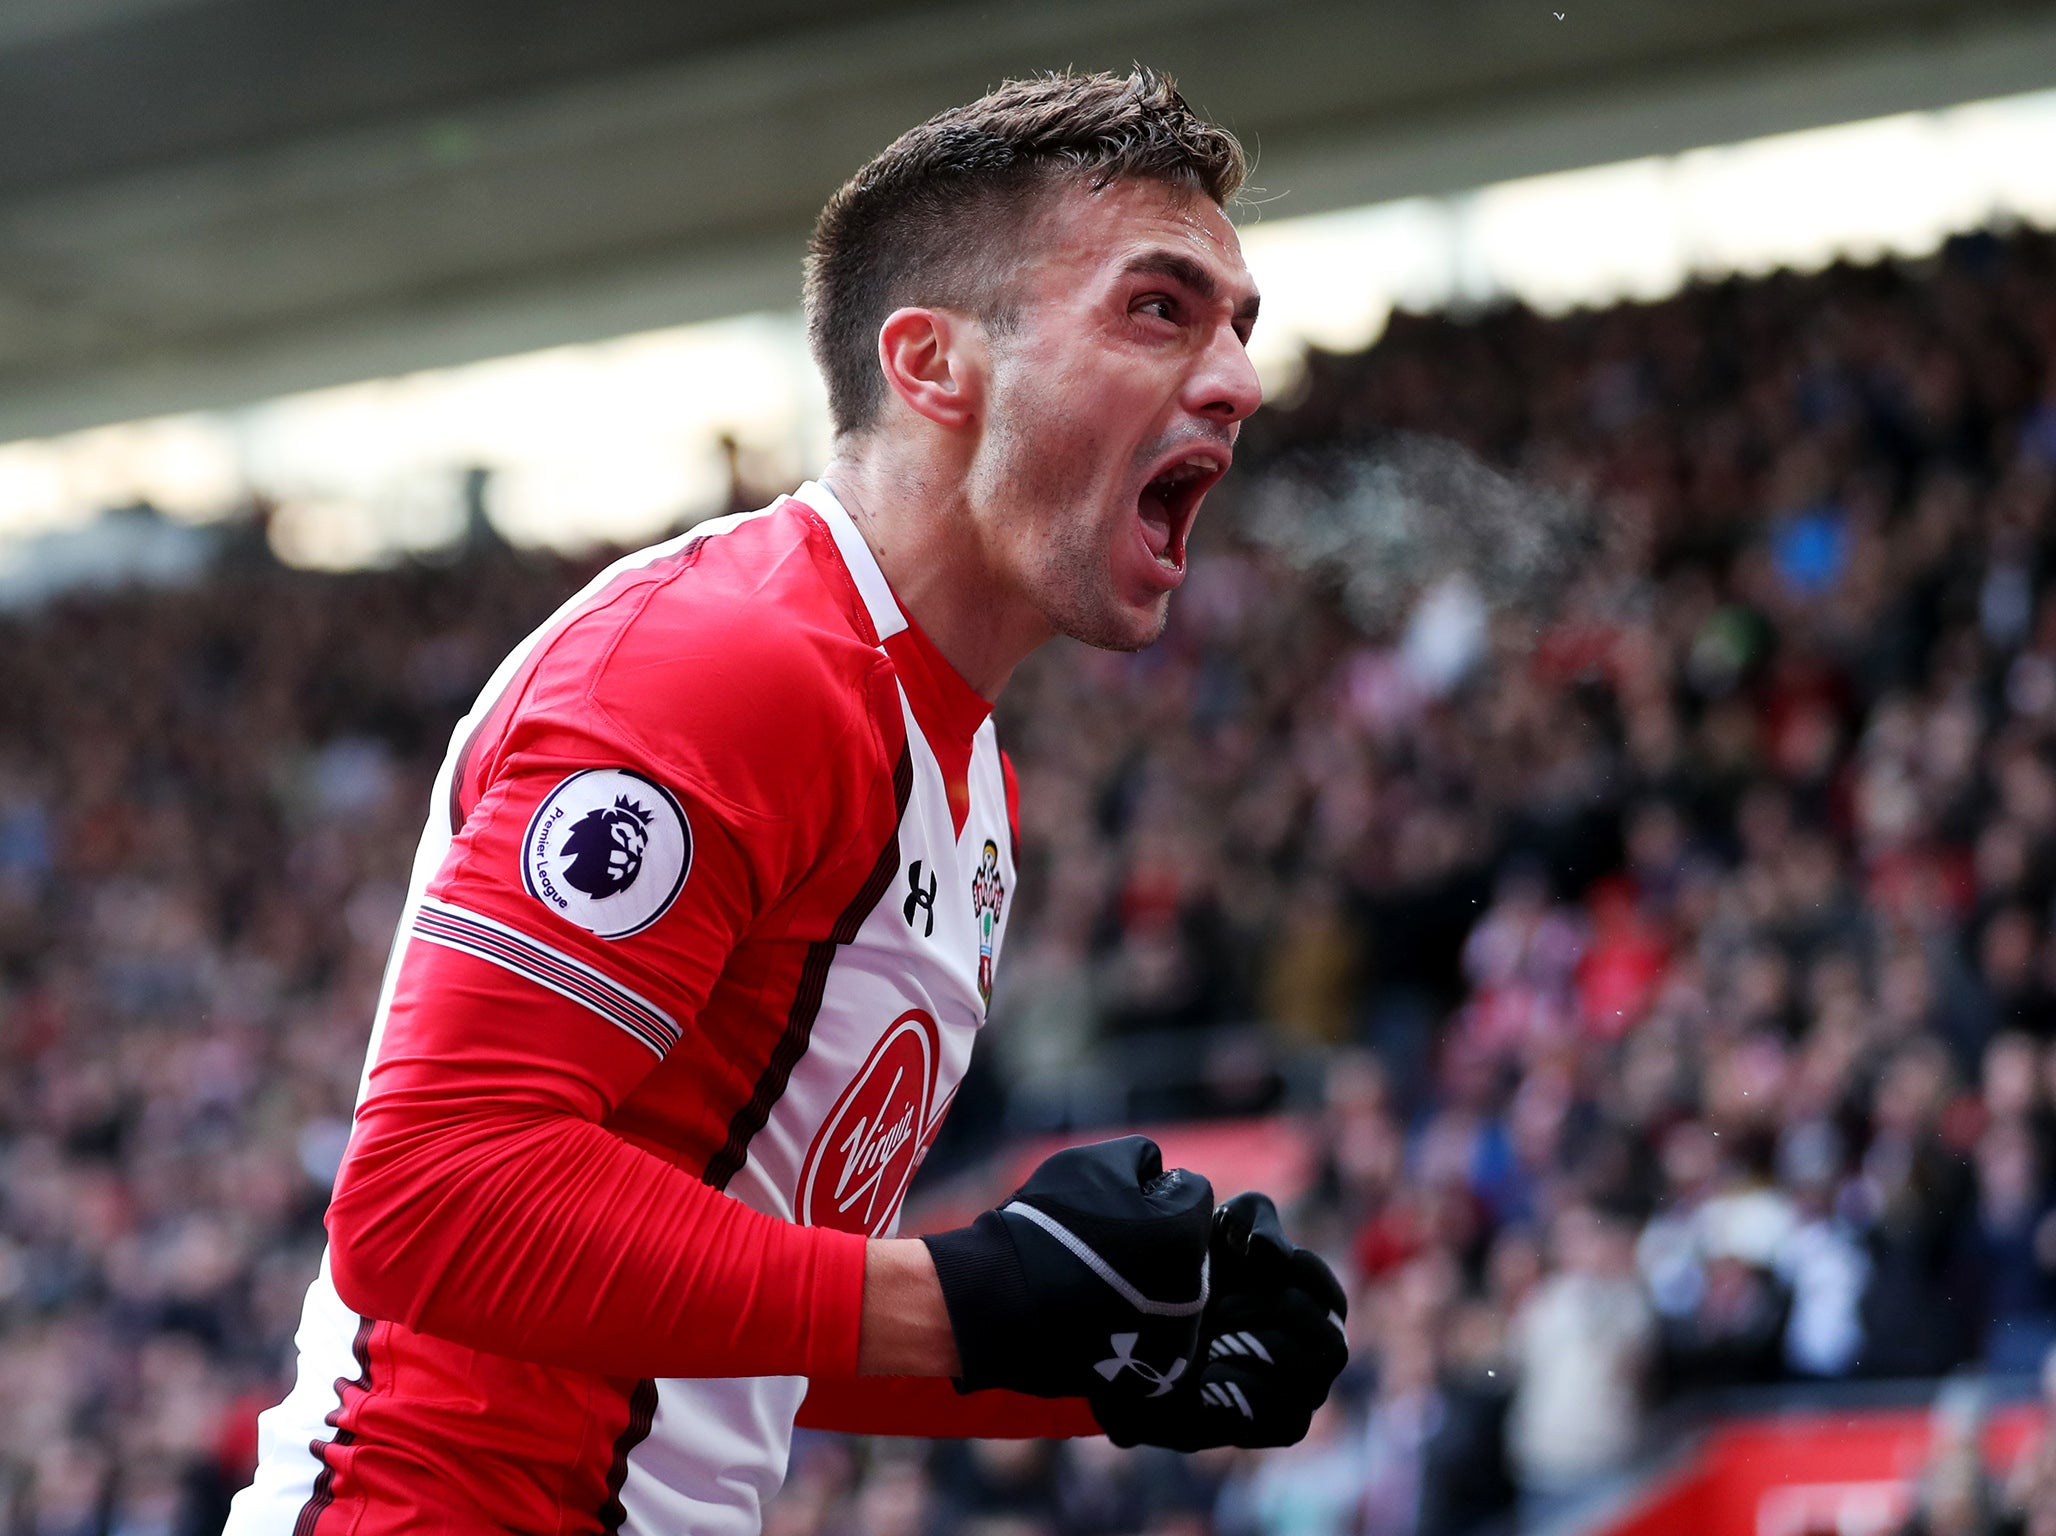 Tadic gave Southampton the lead with a deft finish